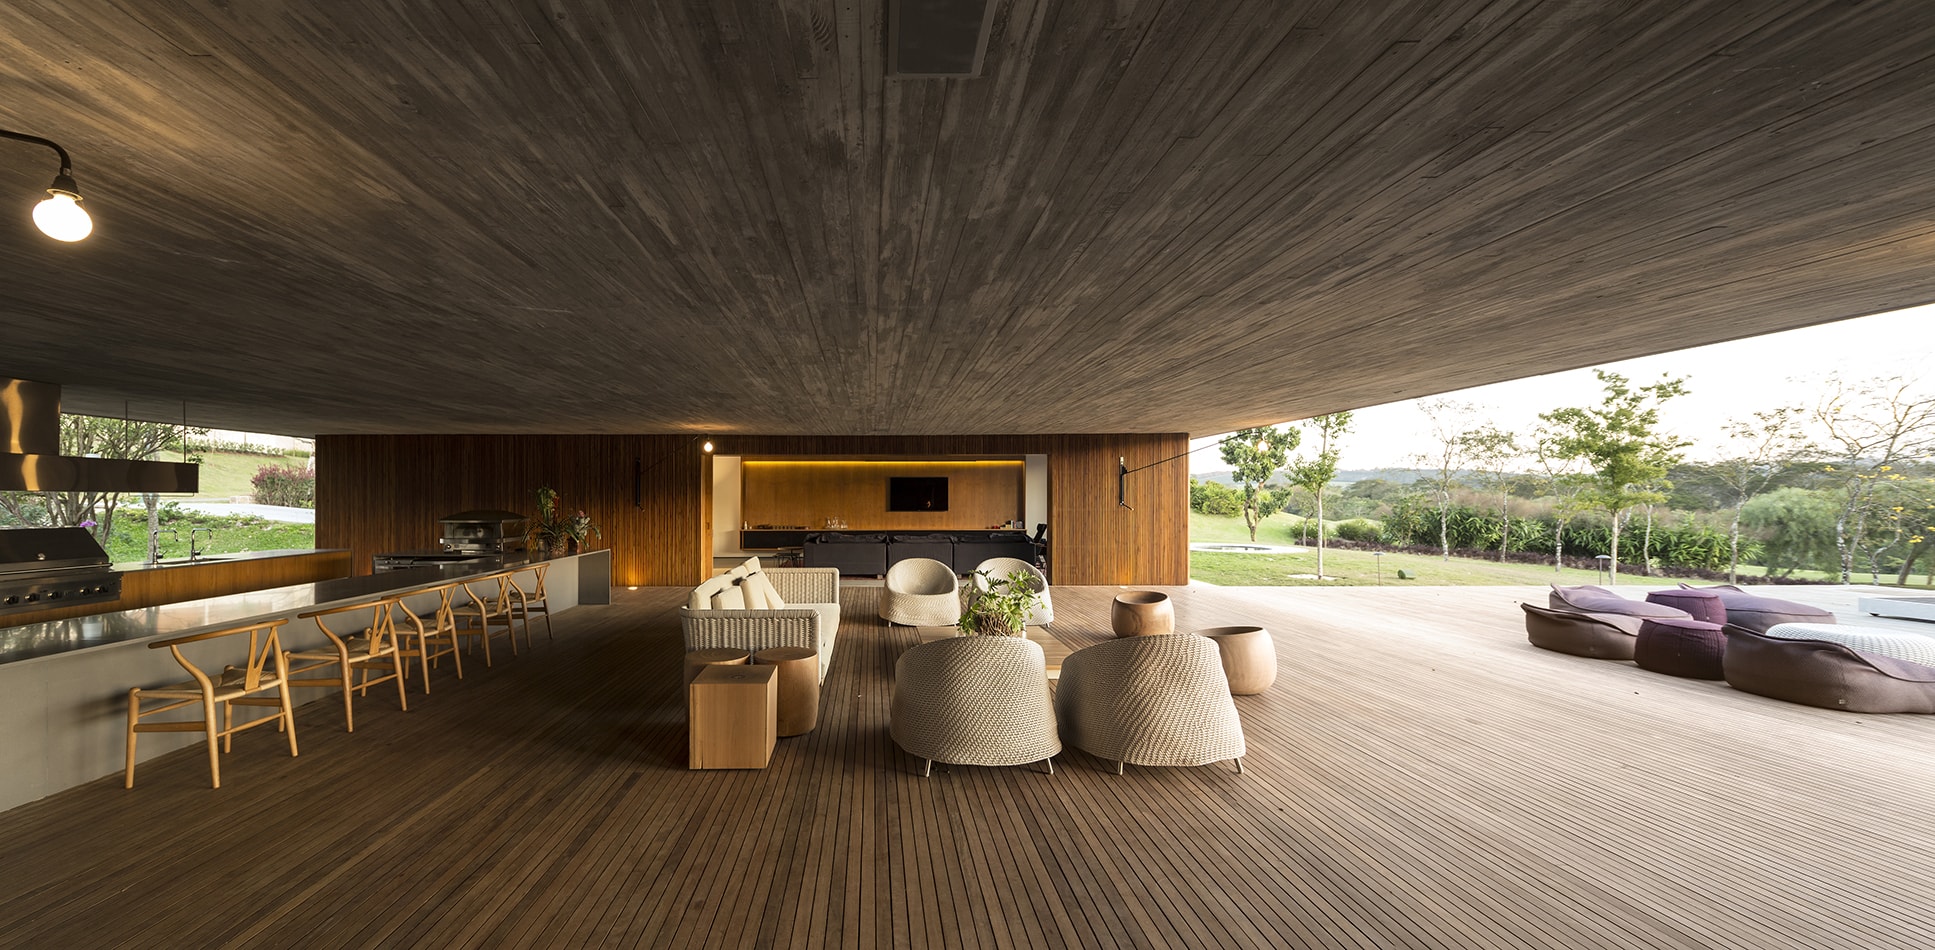 Australia embraces timber with the uptake of sub-tropical modernist architecture